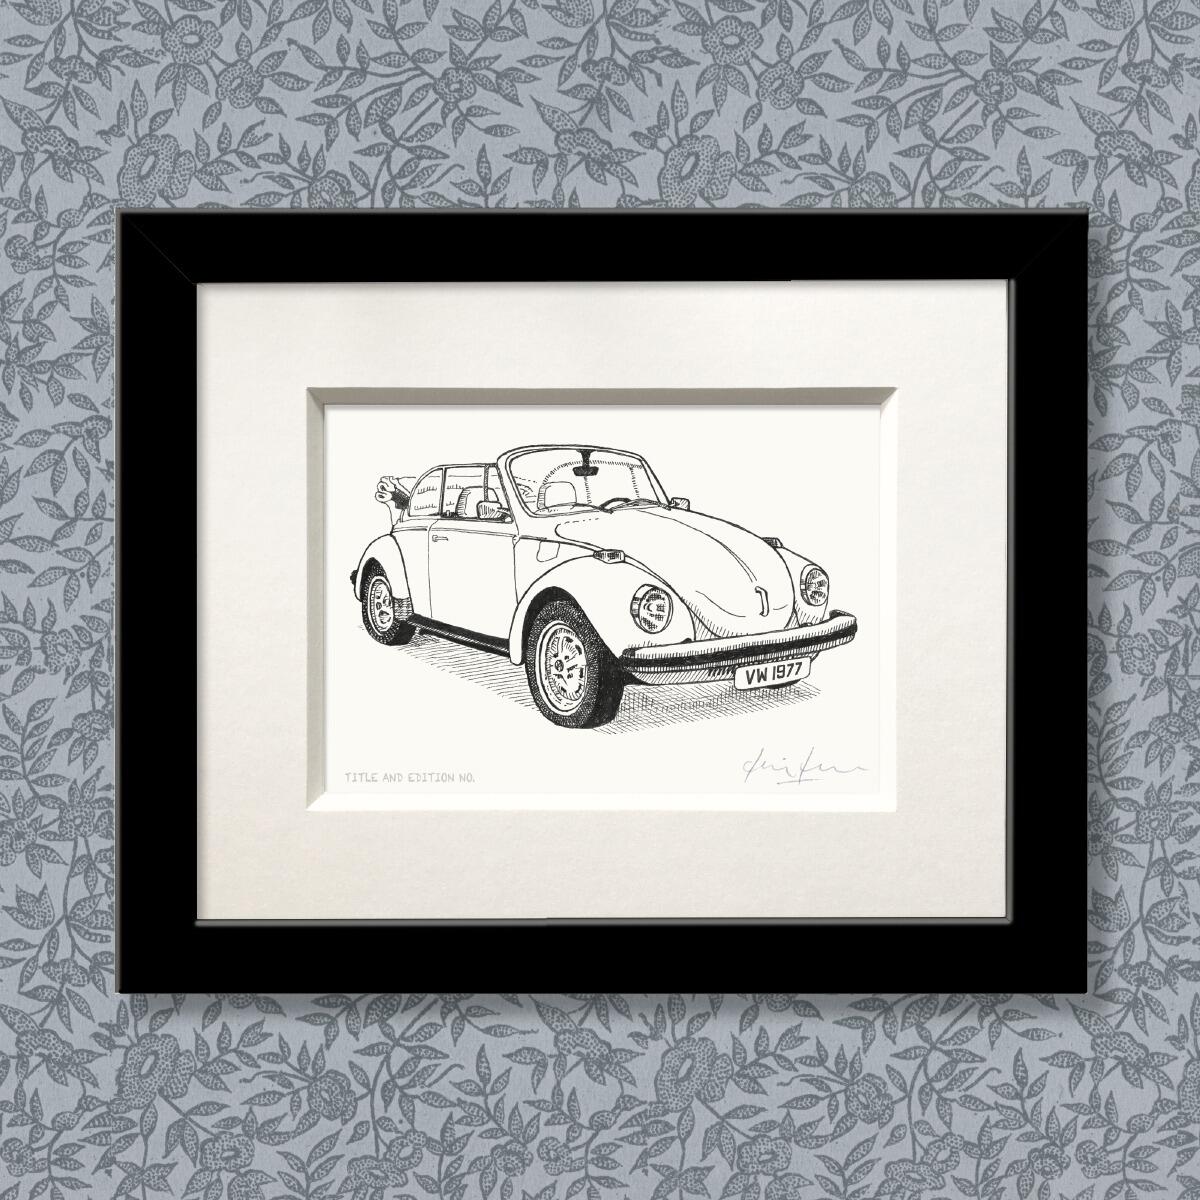 Limited edition print from pen and ink drawing of a 1977 soft-top VW Beetle in black frame